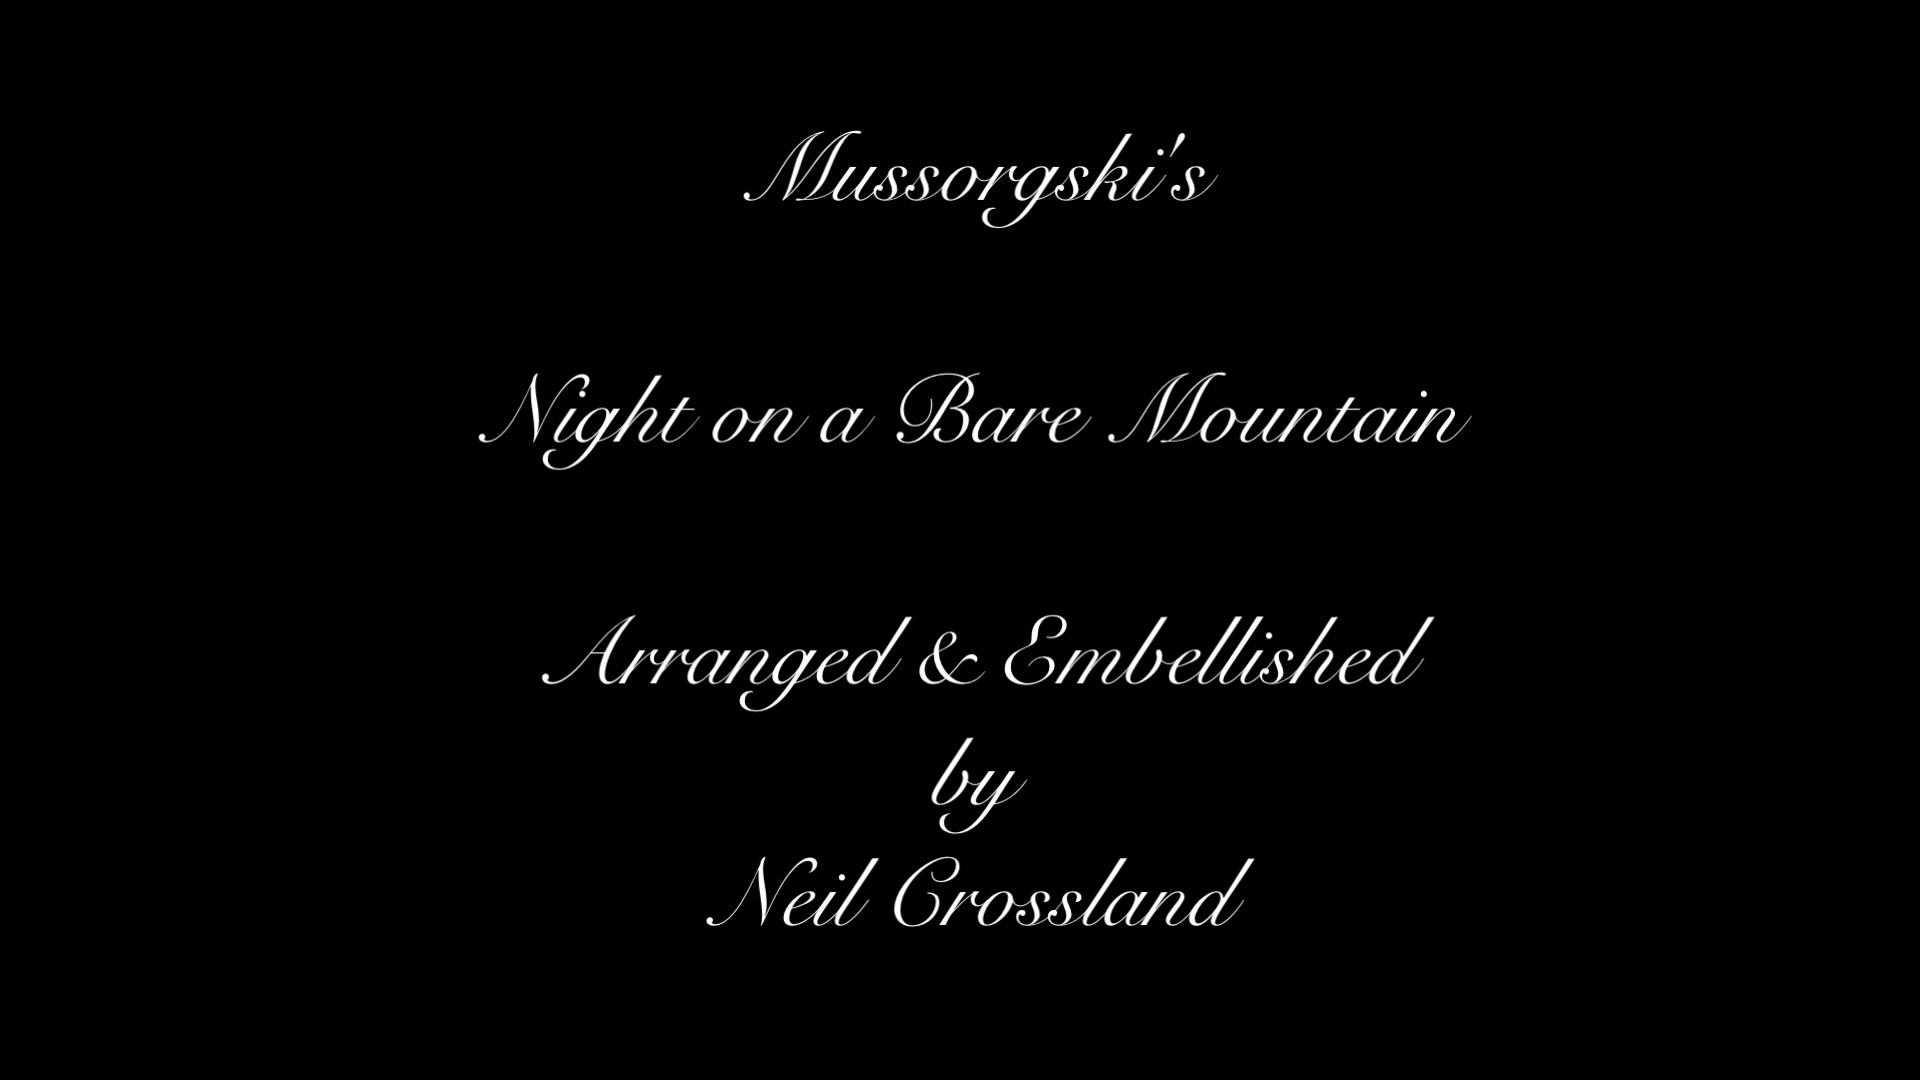 Mussorgski - Night on a Bare Mountain - Arranged and Embellished by Neil Crossland - Performed by Neil Crossland